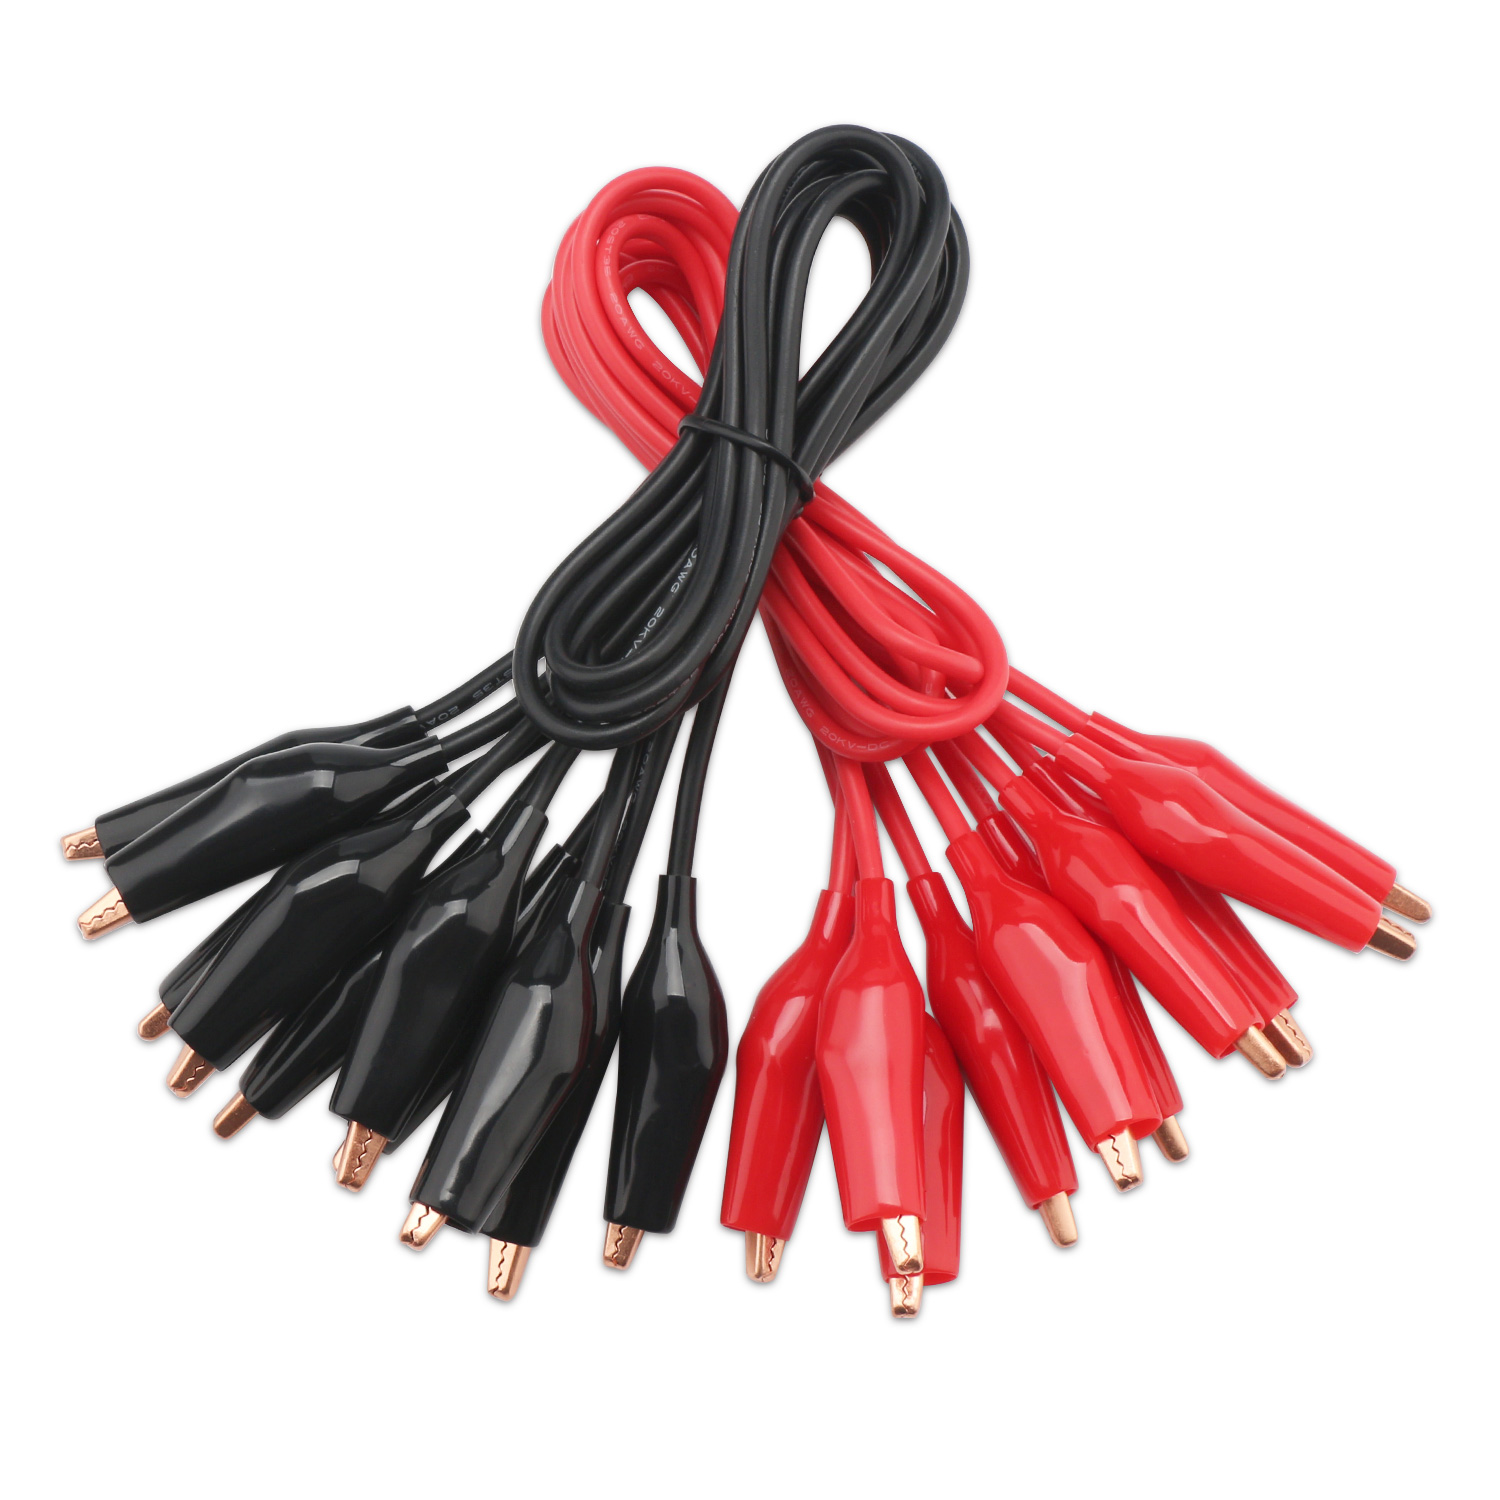 10 Pcs Crocodile Clips Cable Double-ended Alligator Jumper Test Leads Wire Tool